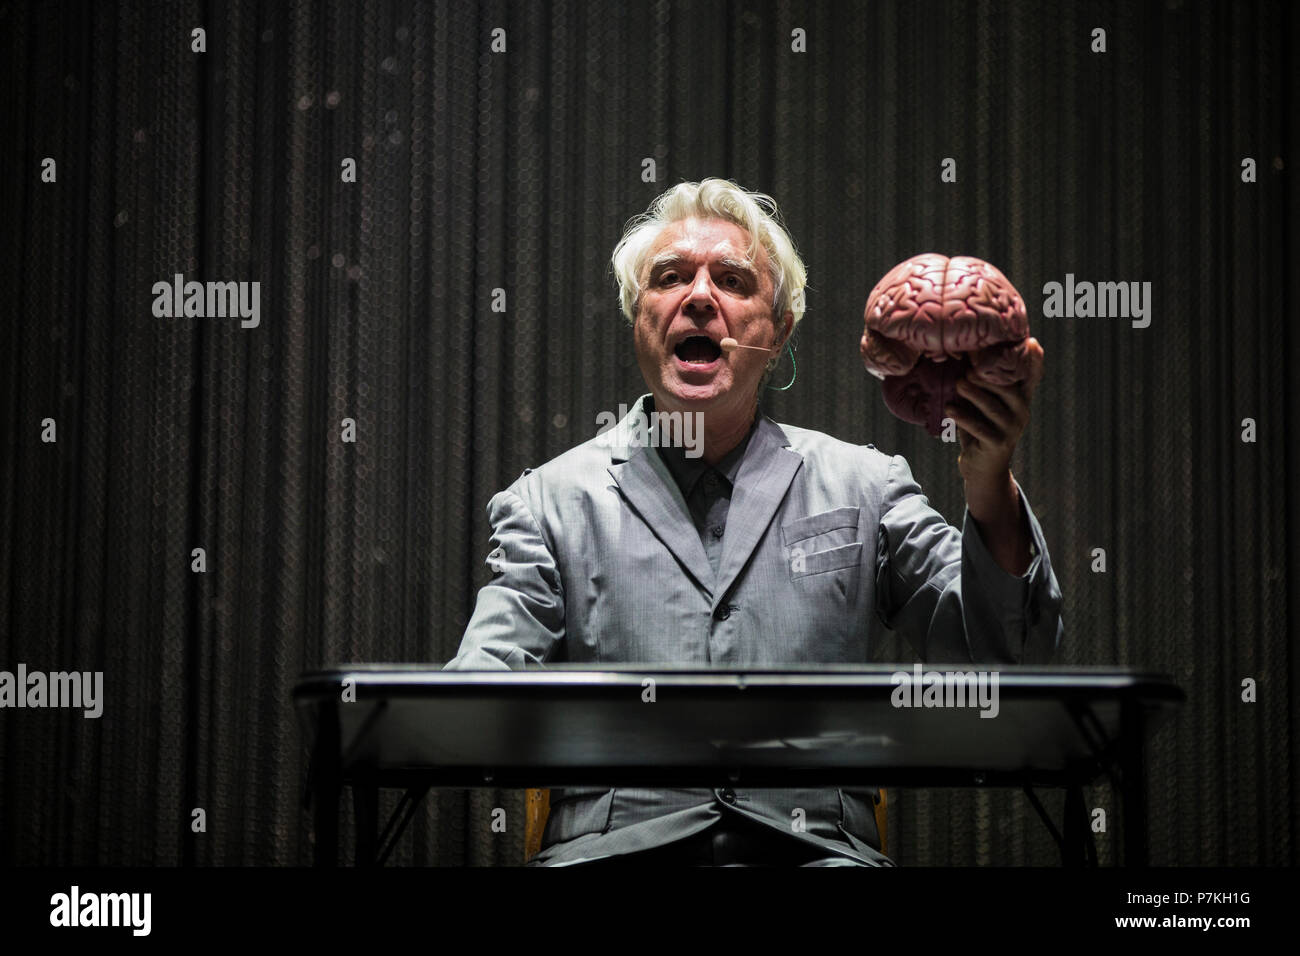 Denmark, Roskilde - July 7, 2018. The Scottish-American singer, songwriter and musician David Byrne performs a live concert during the Danish music festival Roskilde Festival 2018. (Photo credit: Gonzales Photo - Christian Hjorth). Credit: Gonzales Photo/Alamy Live News Stock Photo